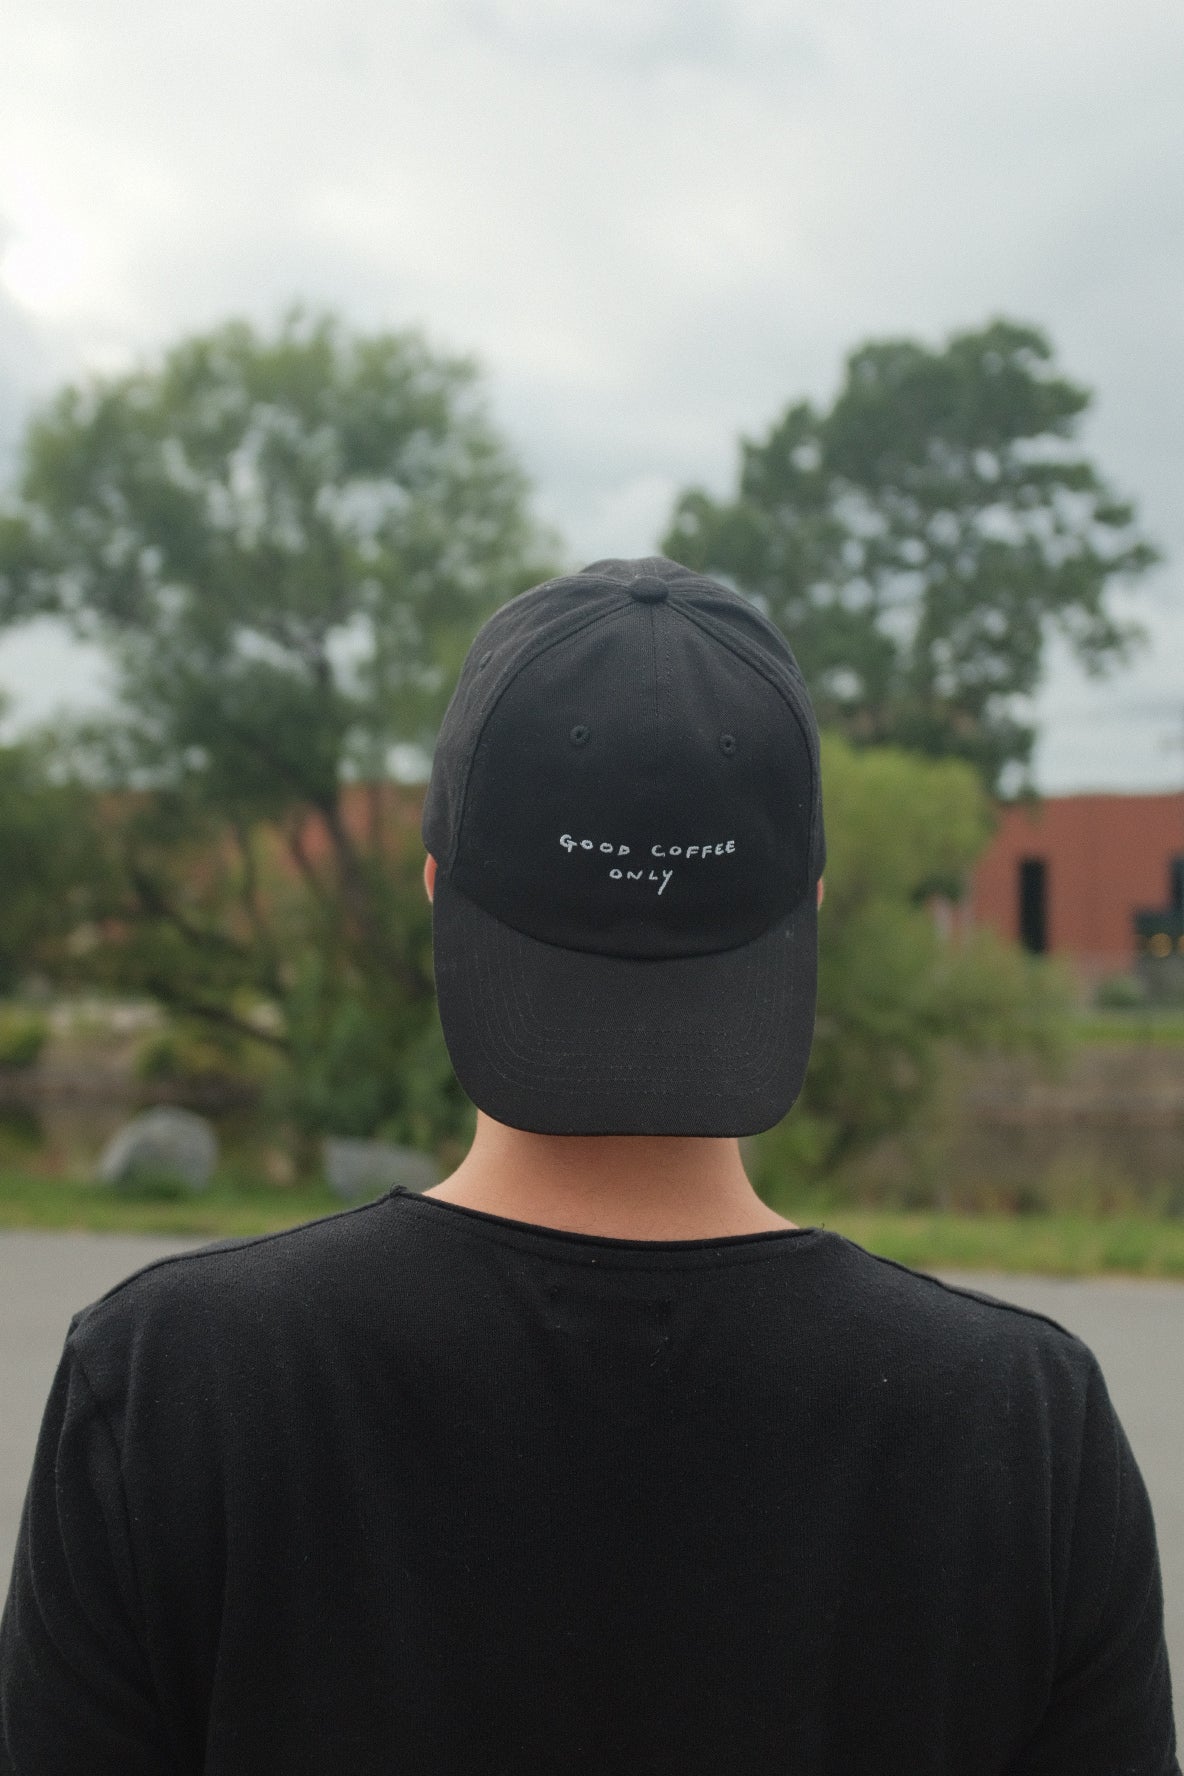 Dad Hat - Good coffee only